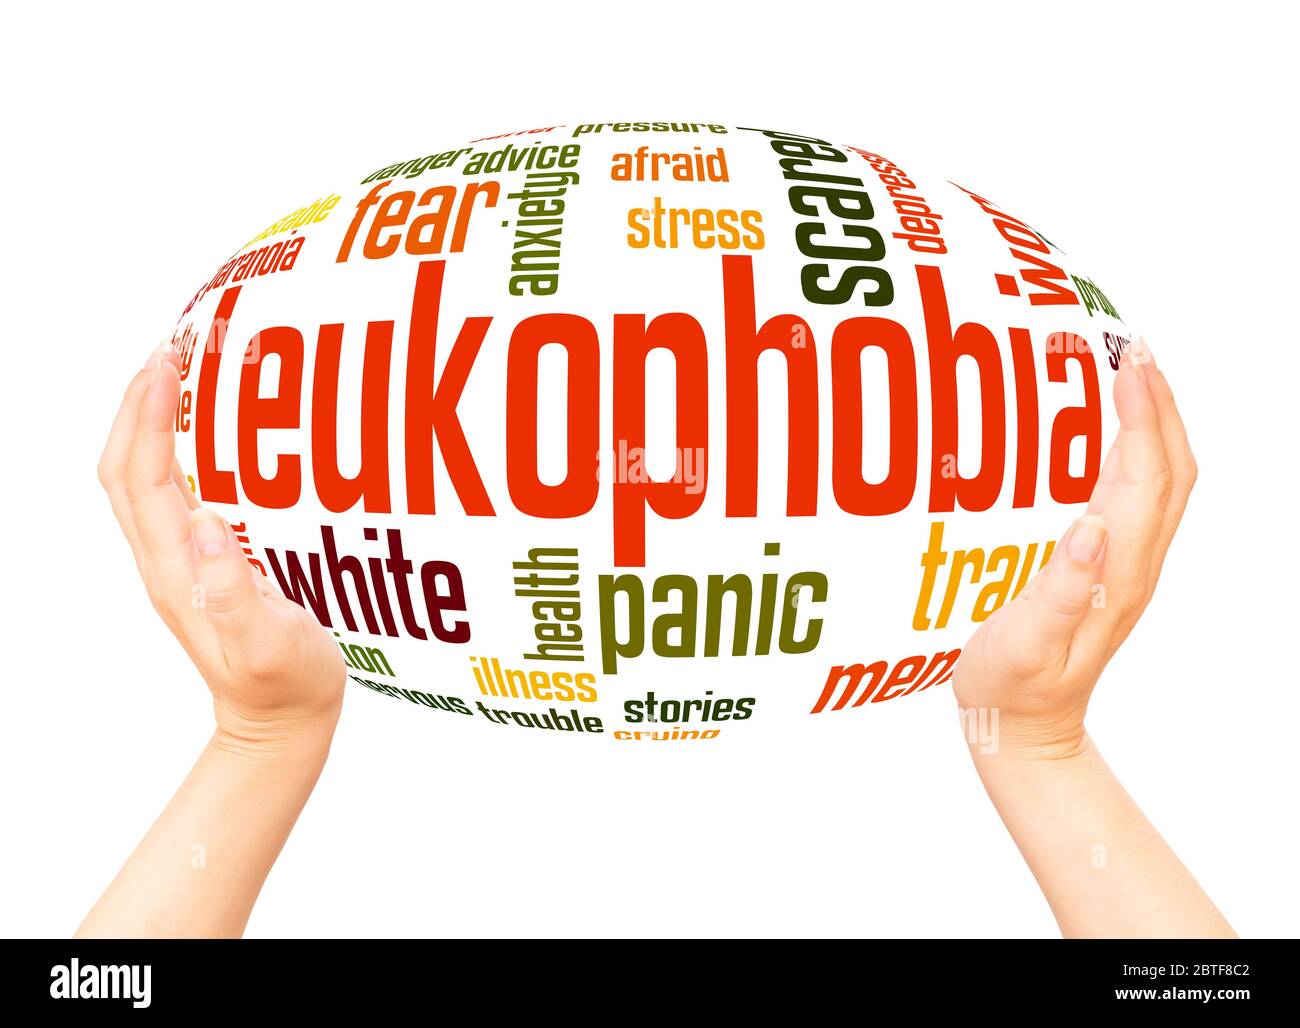 Leukophobia fear of the color white word hand sphere cloud concept on white background. Stock Photo